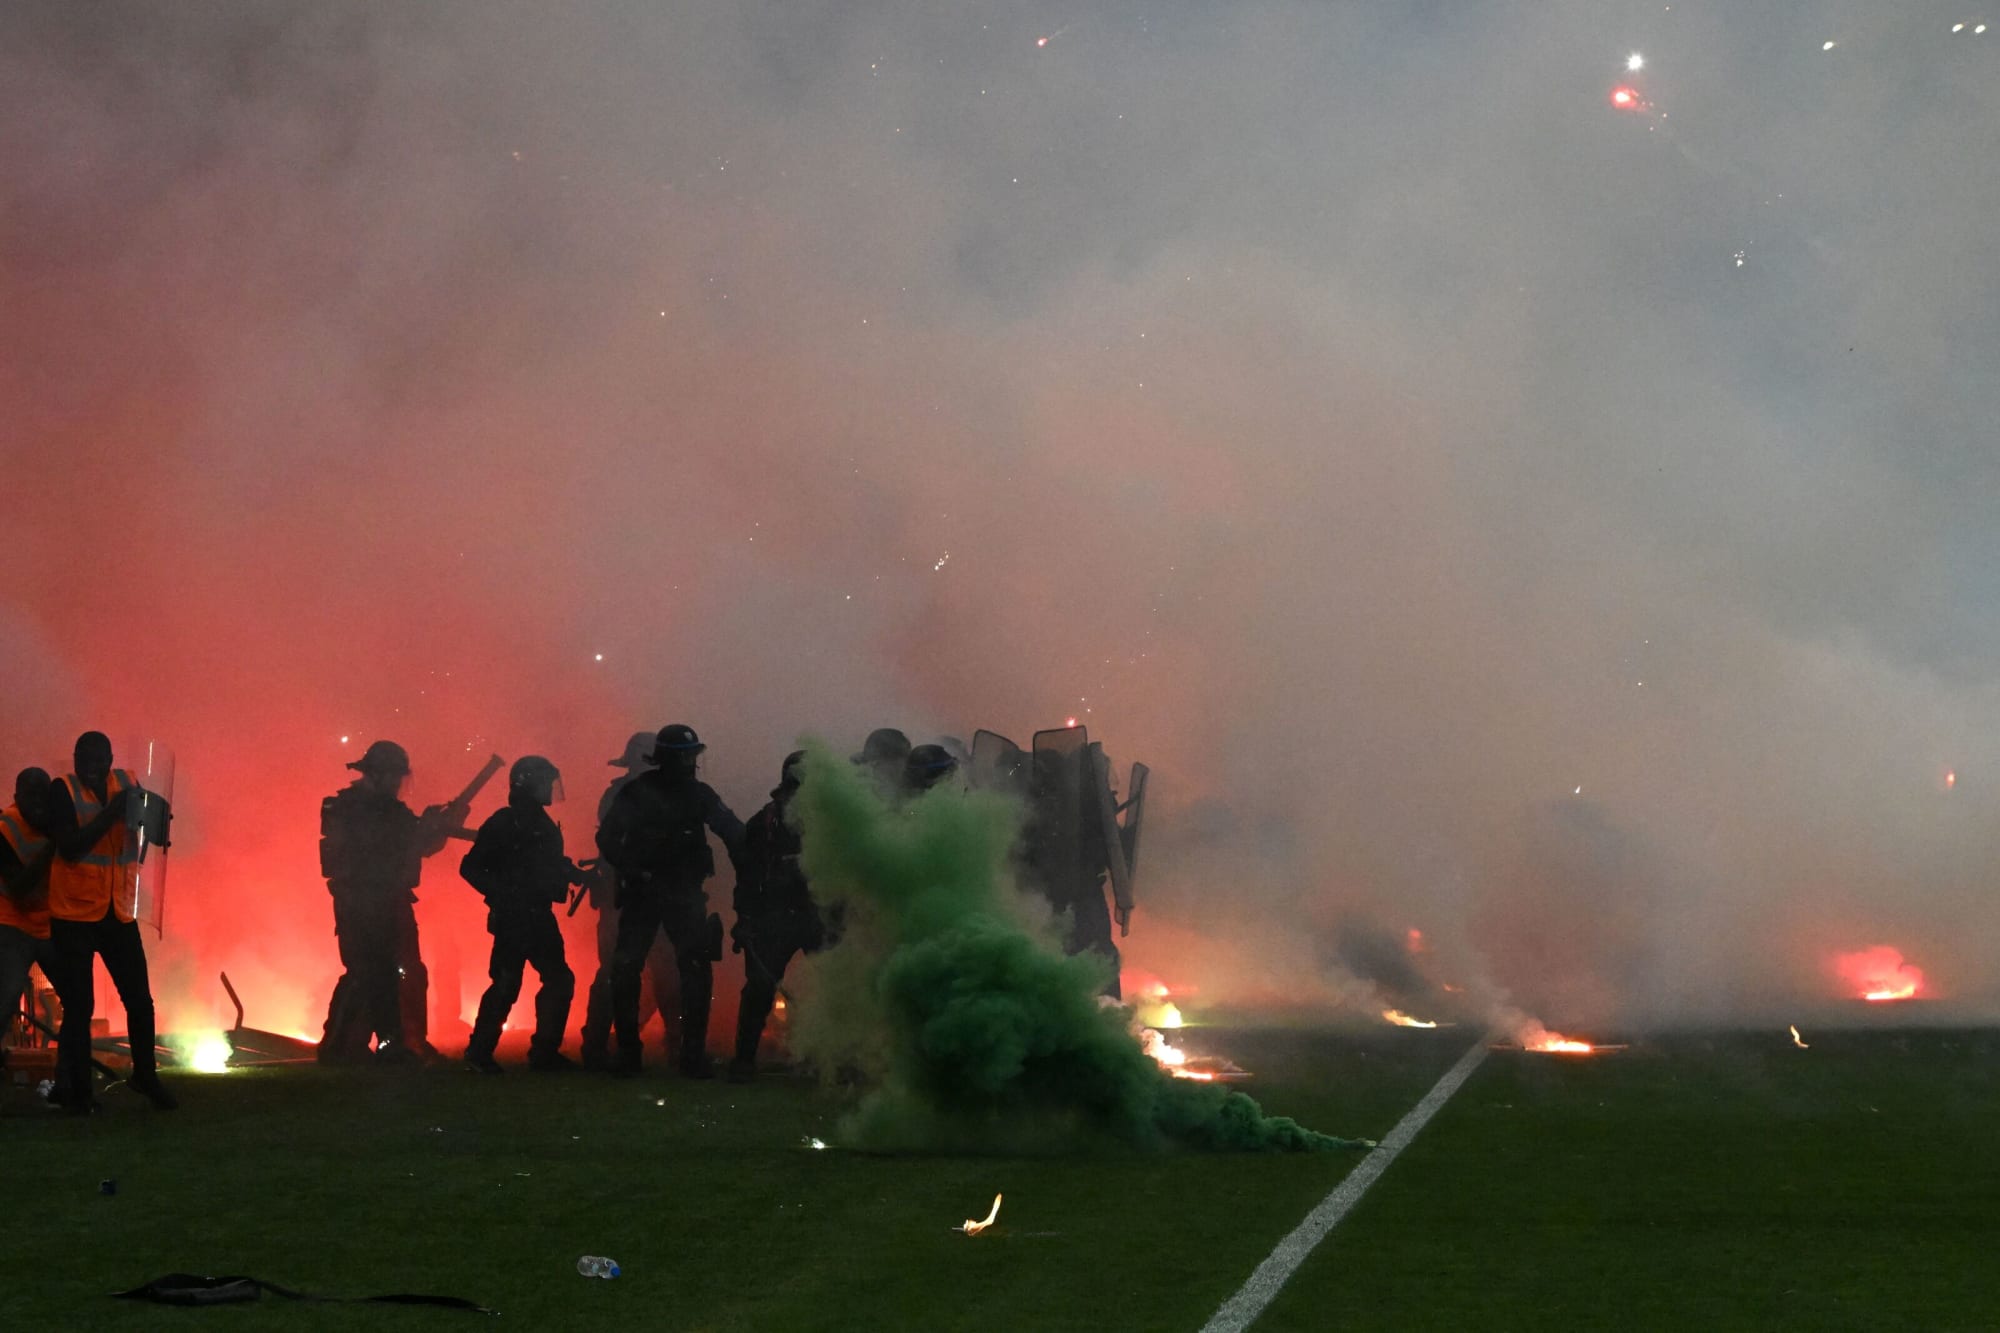 Saint-Etienne fans storm pitch, throw flares at players after relegation thumbnail